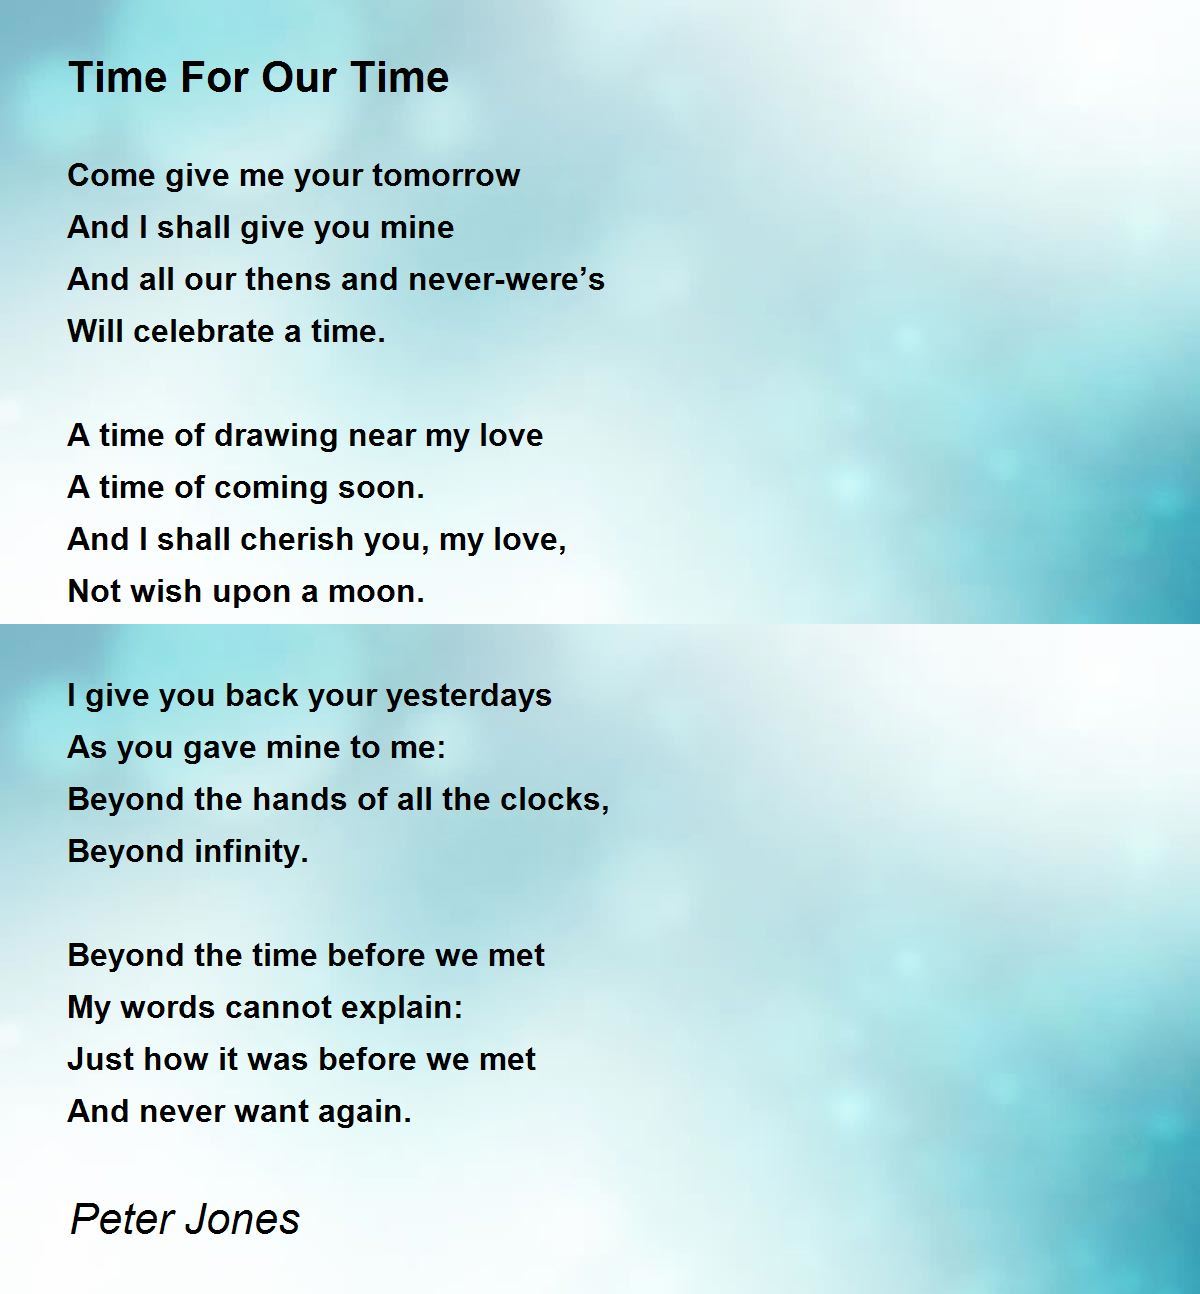 Time For Time - Time For Our Time by Peter Jones